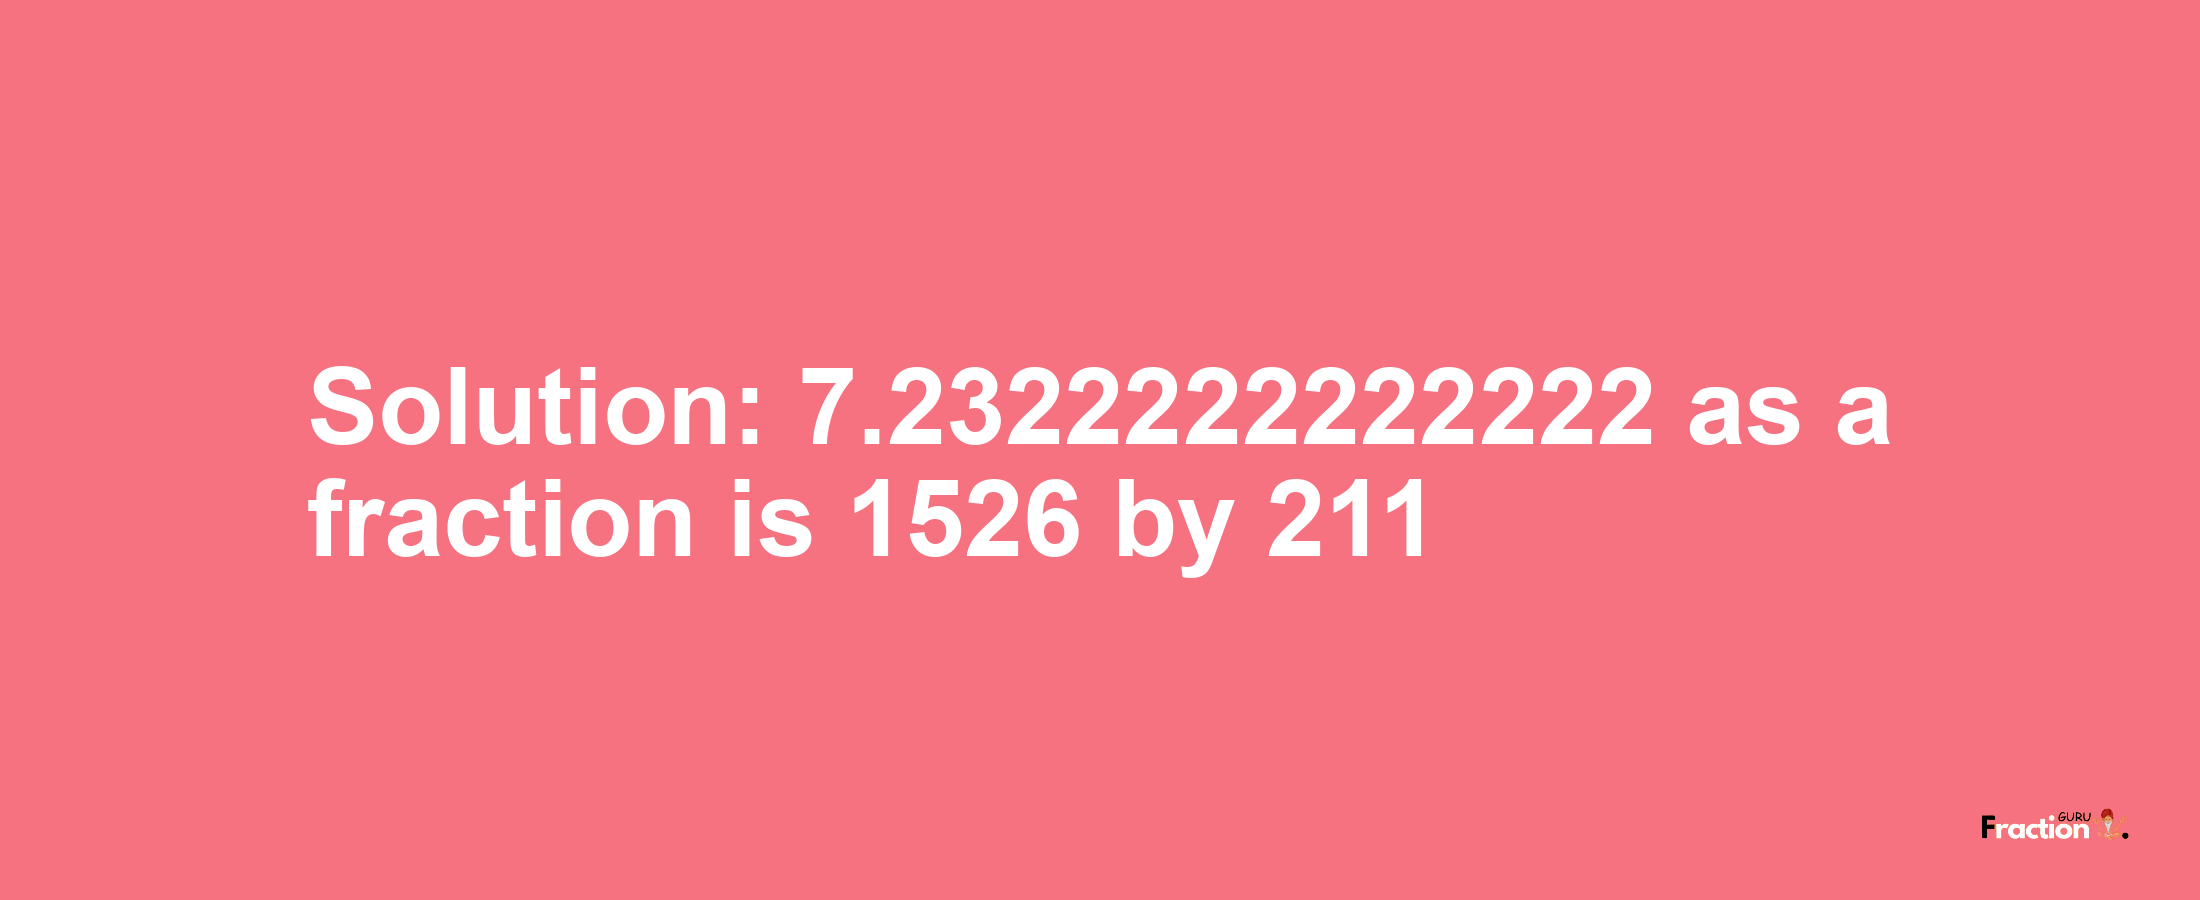 Solution:7.2322222222222 as a fraction is 1526/211